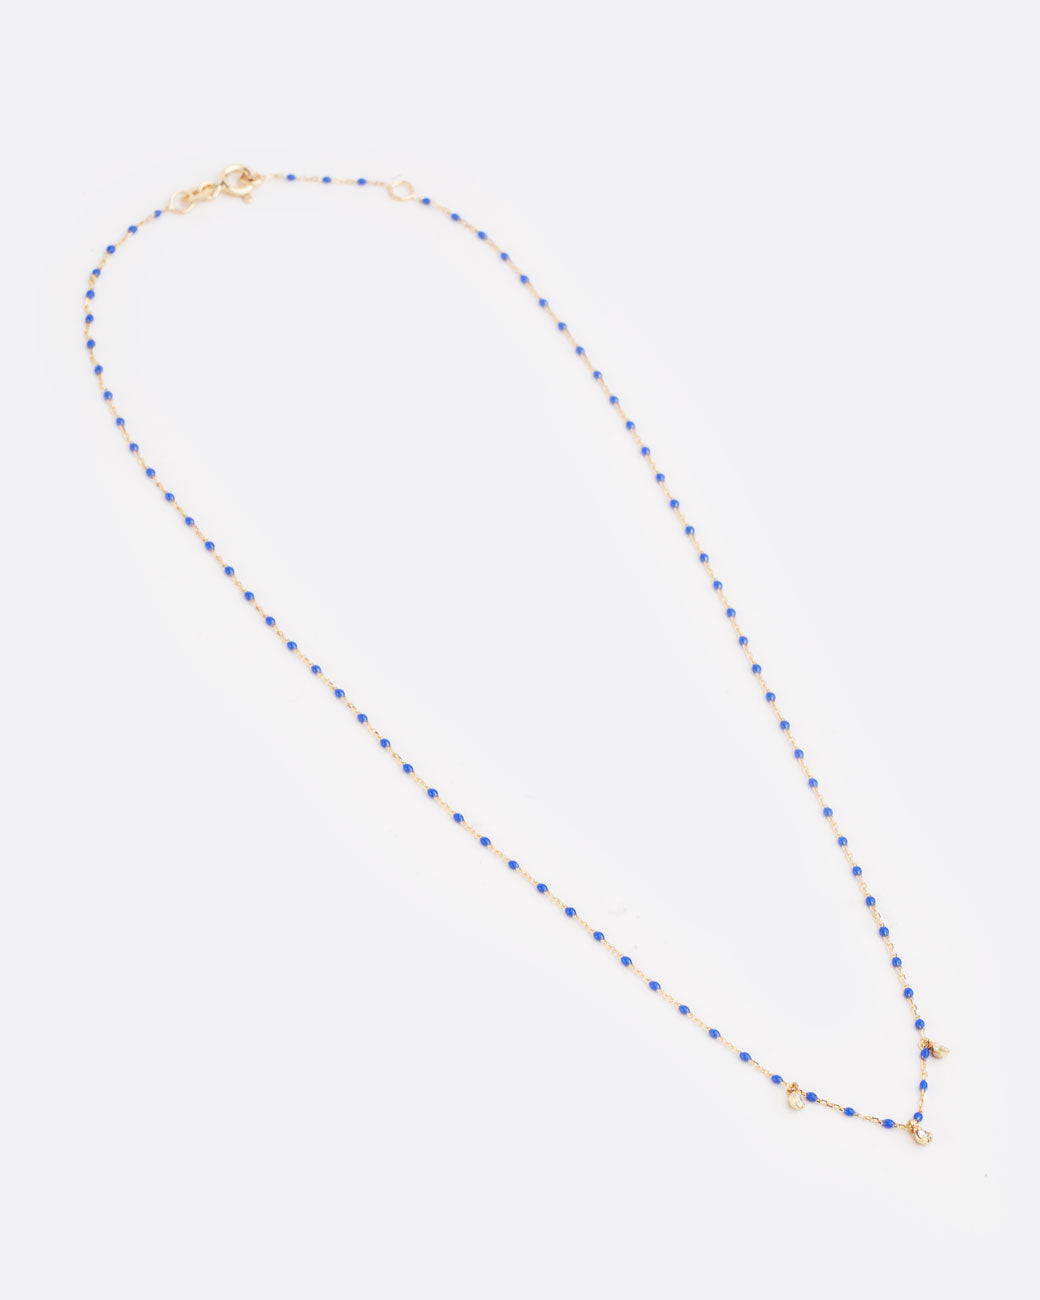 Far out birds eye view of yellow gold chain necklace with small blue resin beads with three diamond pendants alternating every two beads from the bottom of the necklace with clasp closed.